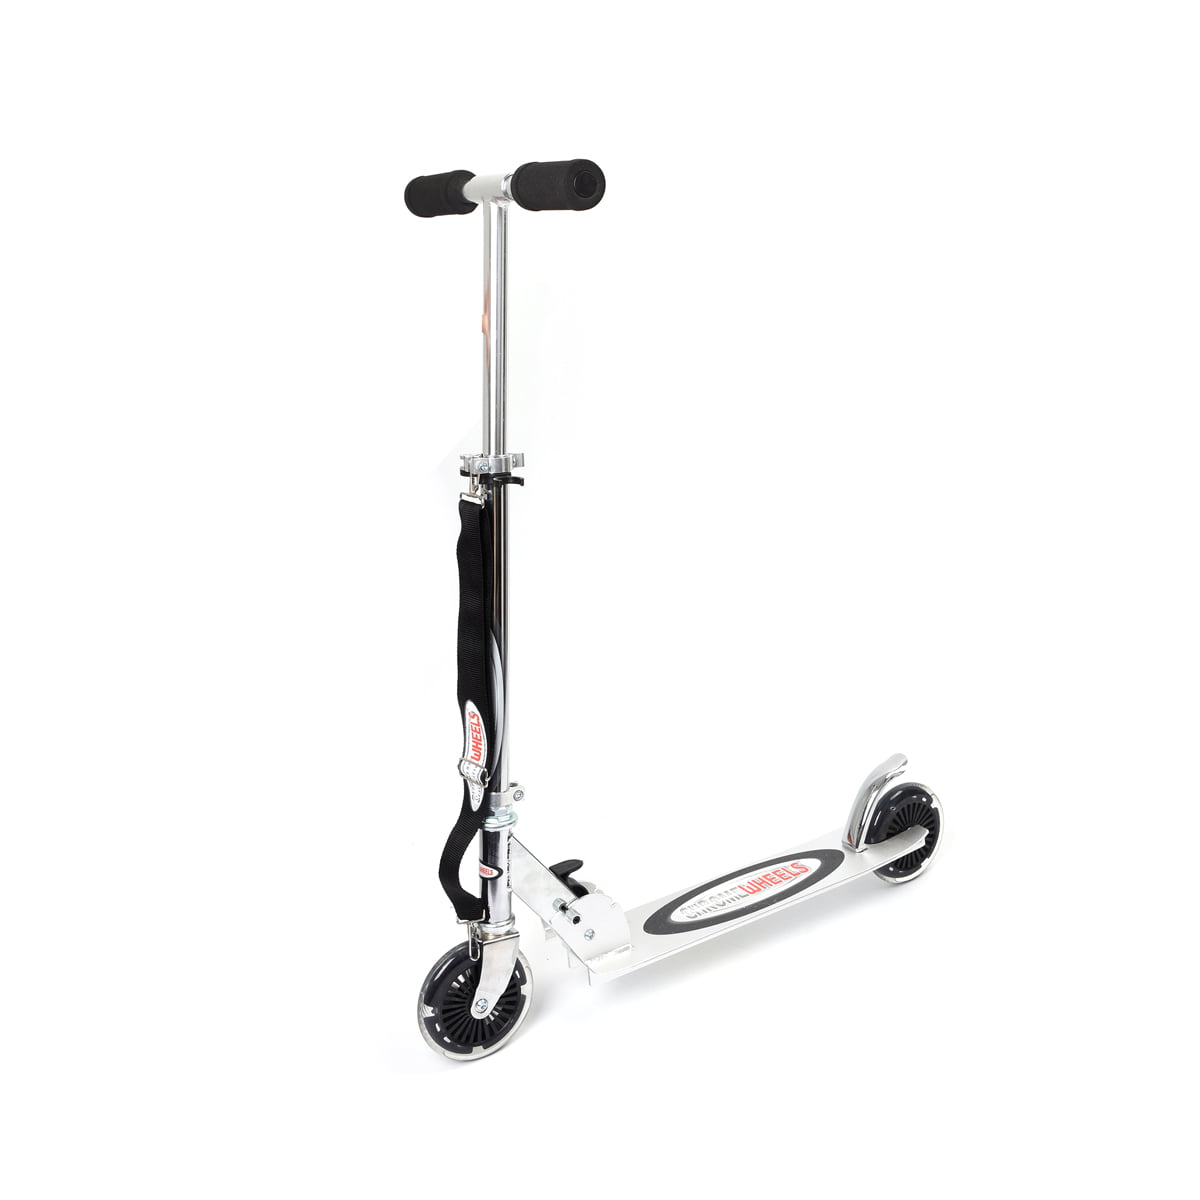 ChromeWheels Scooter for Kids, Deluxe 2 Wheel Kick Scooters 4 Adjustable  Height with LED Light Up Wheels, for Age 5 up Girls Boys, 132lb Weight Limi